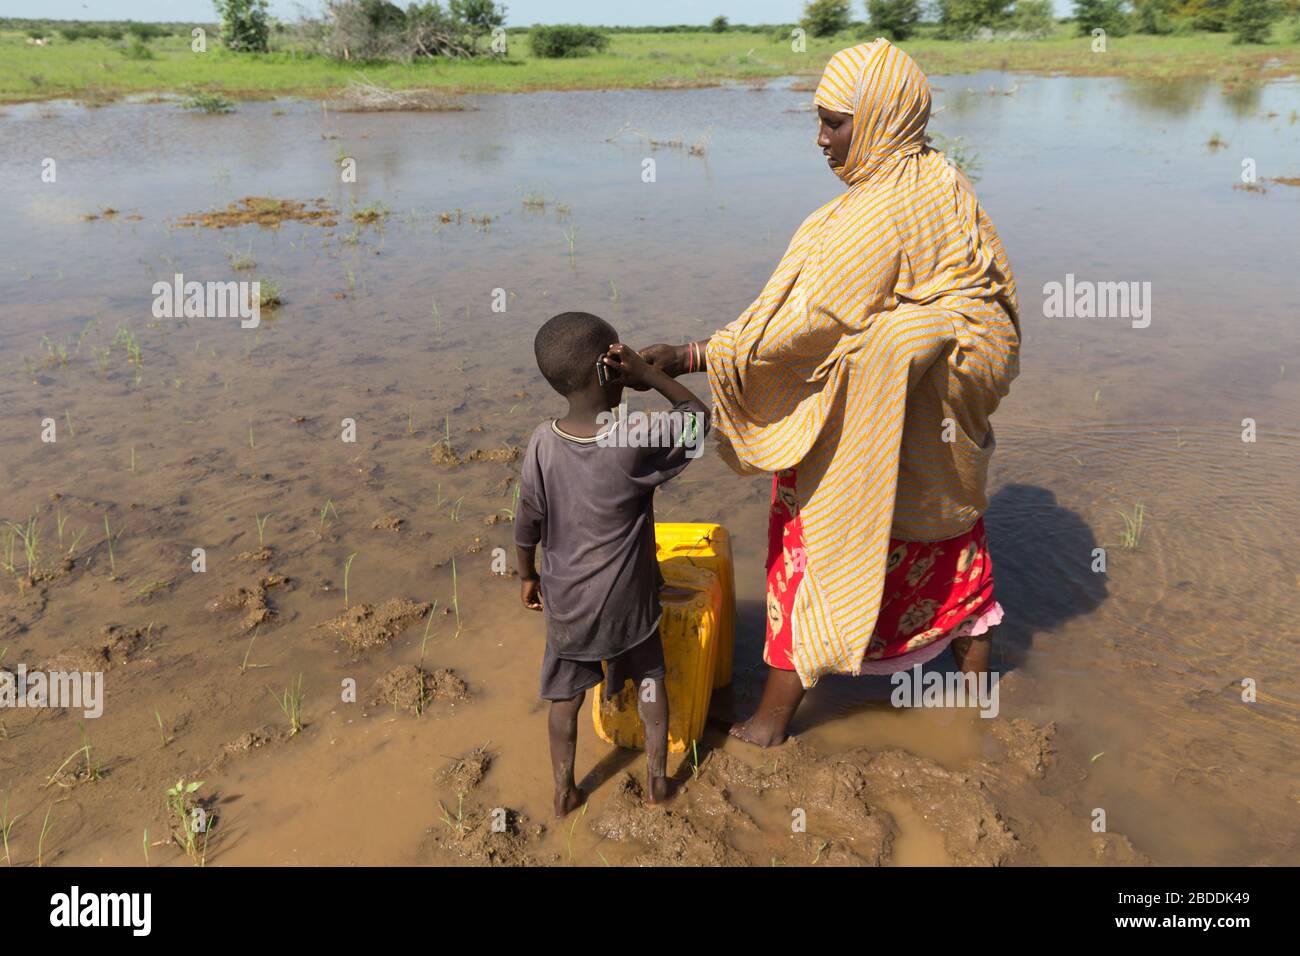 14.11.2019, Gode, Somali Region, Ethiopia - A woman holds a mobile phone to her boy's ear to make a phone call. Natural watering place. Project docume Stock Photo